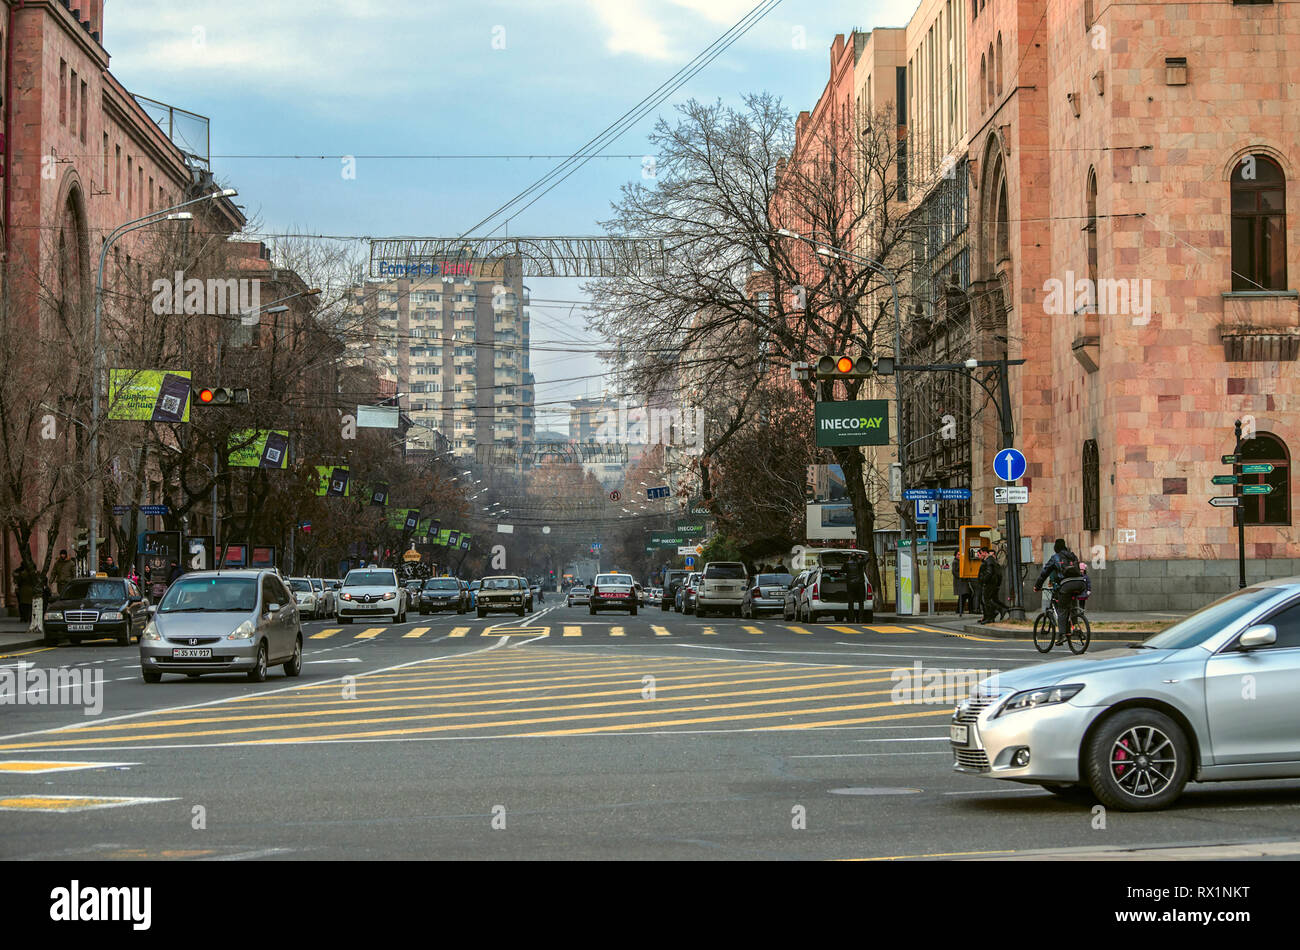 Yerevan, Armenia,January 02,2019: Beginning of Amiryan Street with old buildings that continue the style of the architectural ensemble of the central  Stock Photo